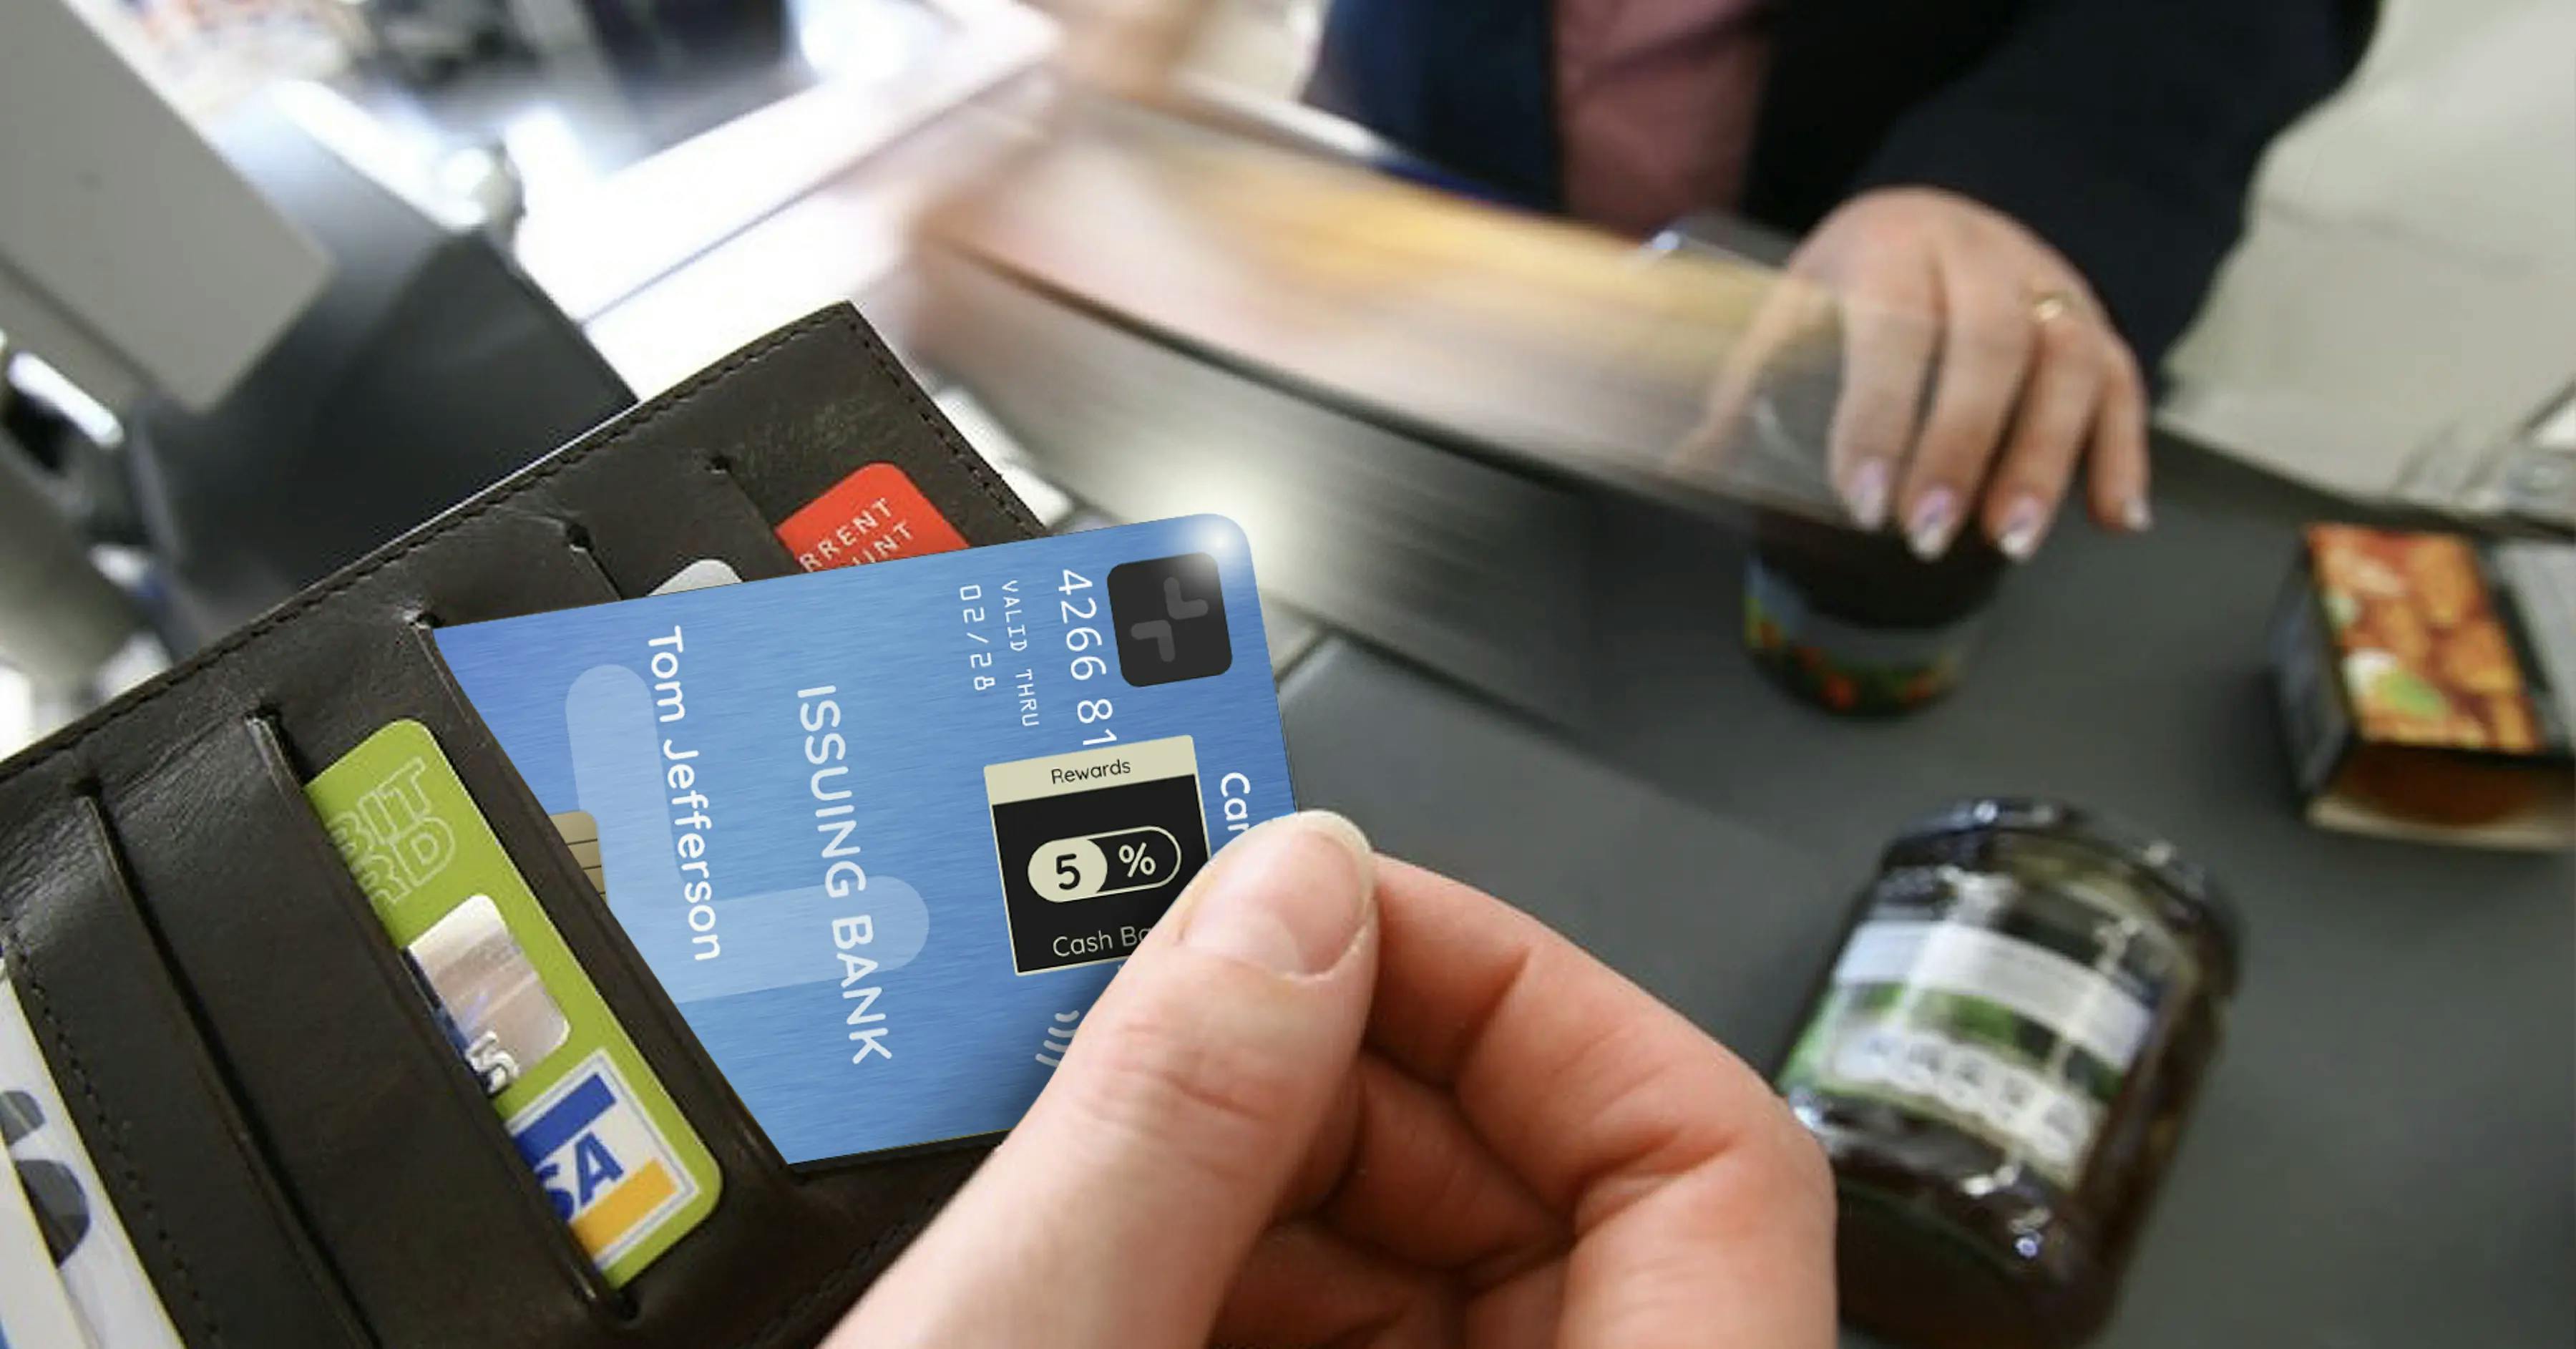 Card+ squared shows rewards at checkout with blinking LED lights